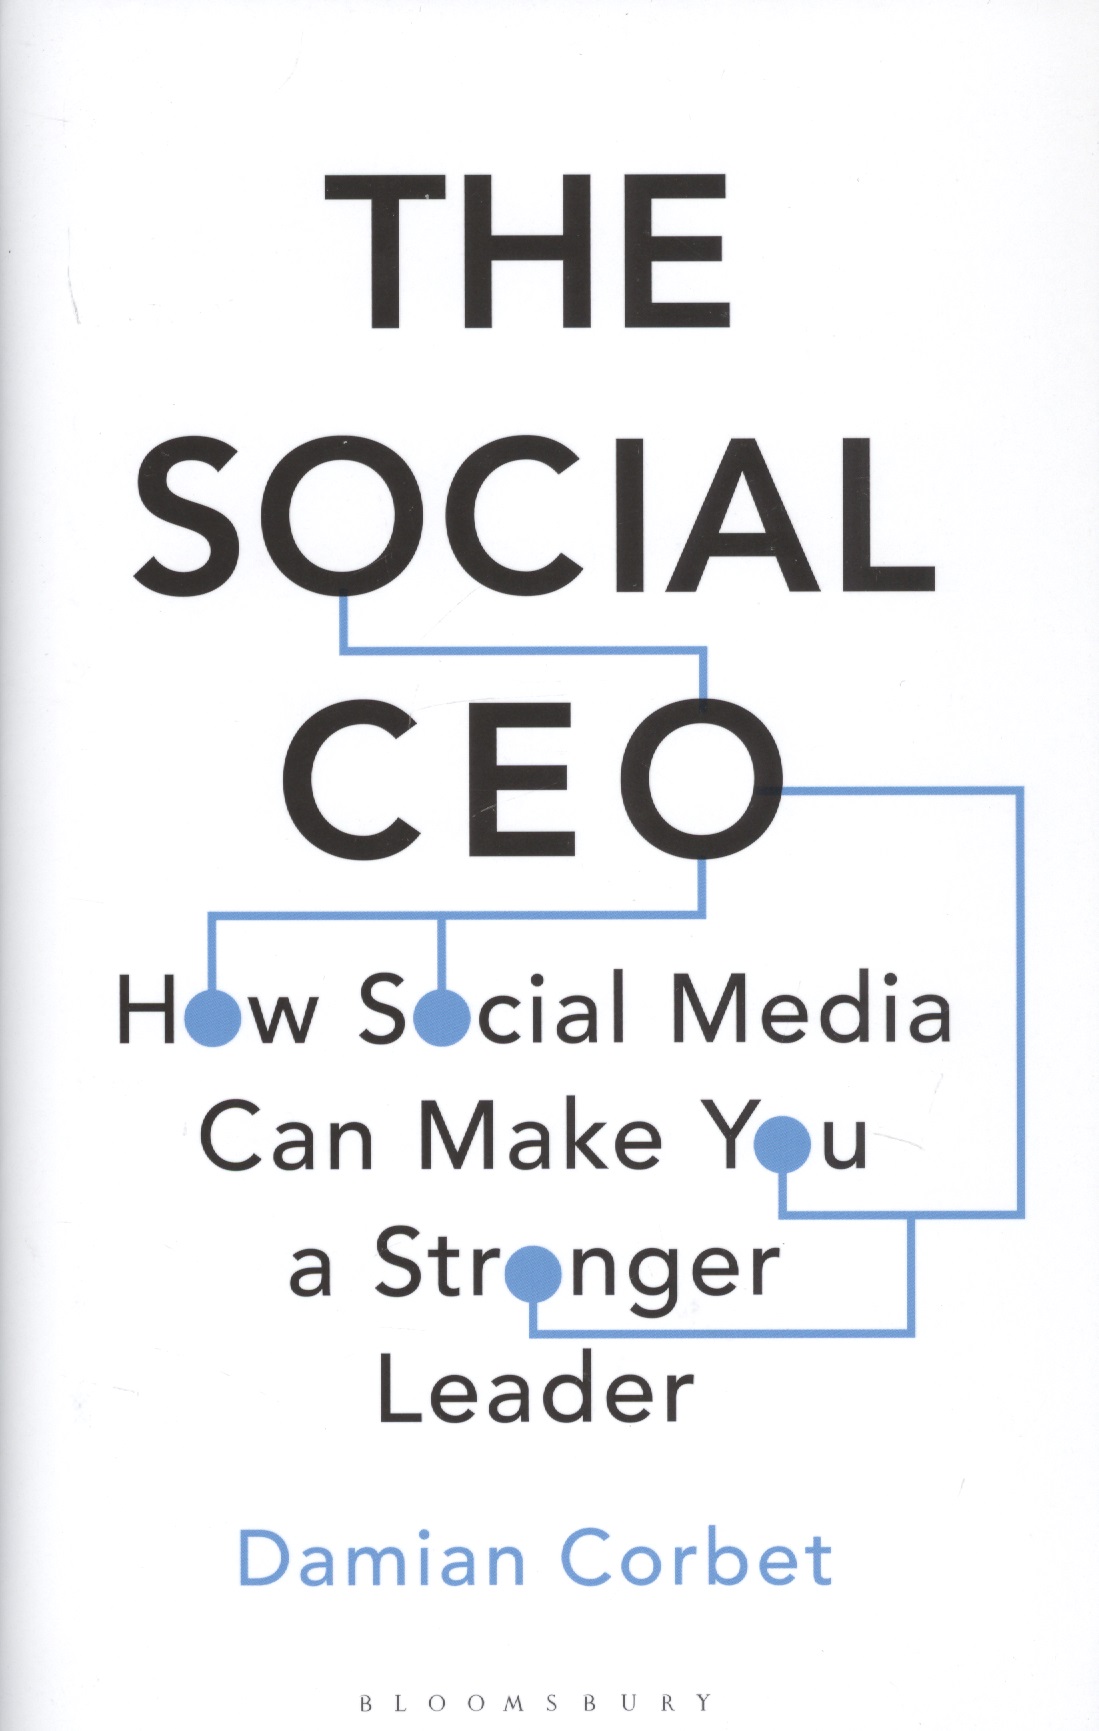 The Social CEO: How Social Media Can Make You A Stronger Leader